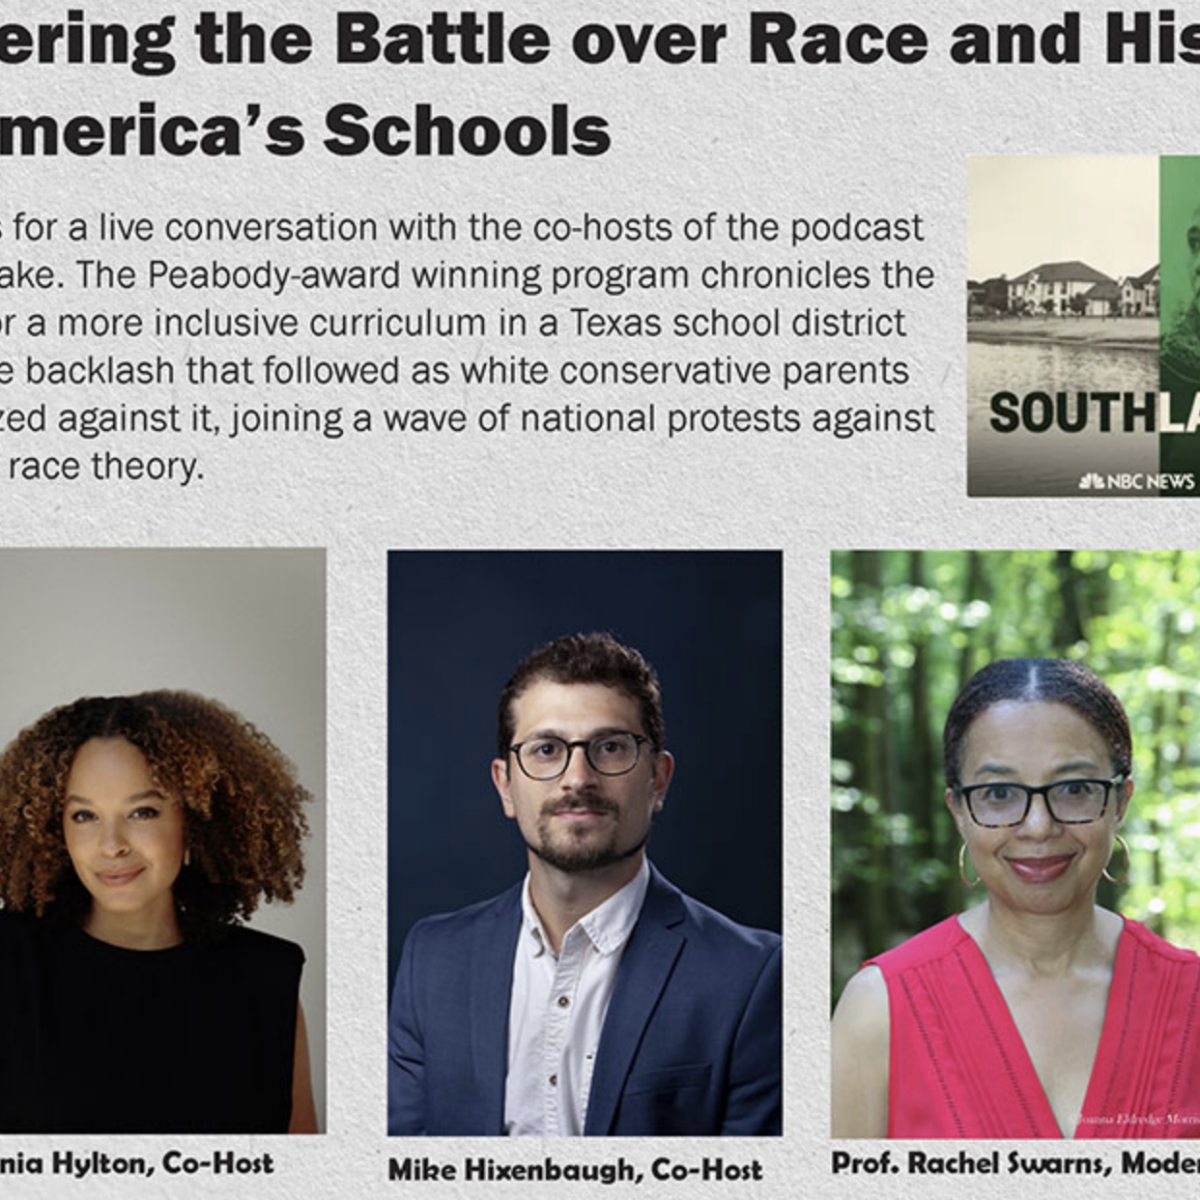 Covering the Battle over Race and History in America’s Schools